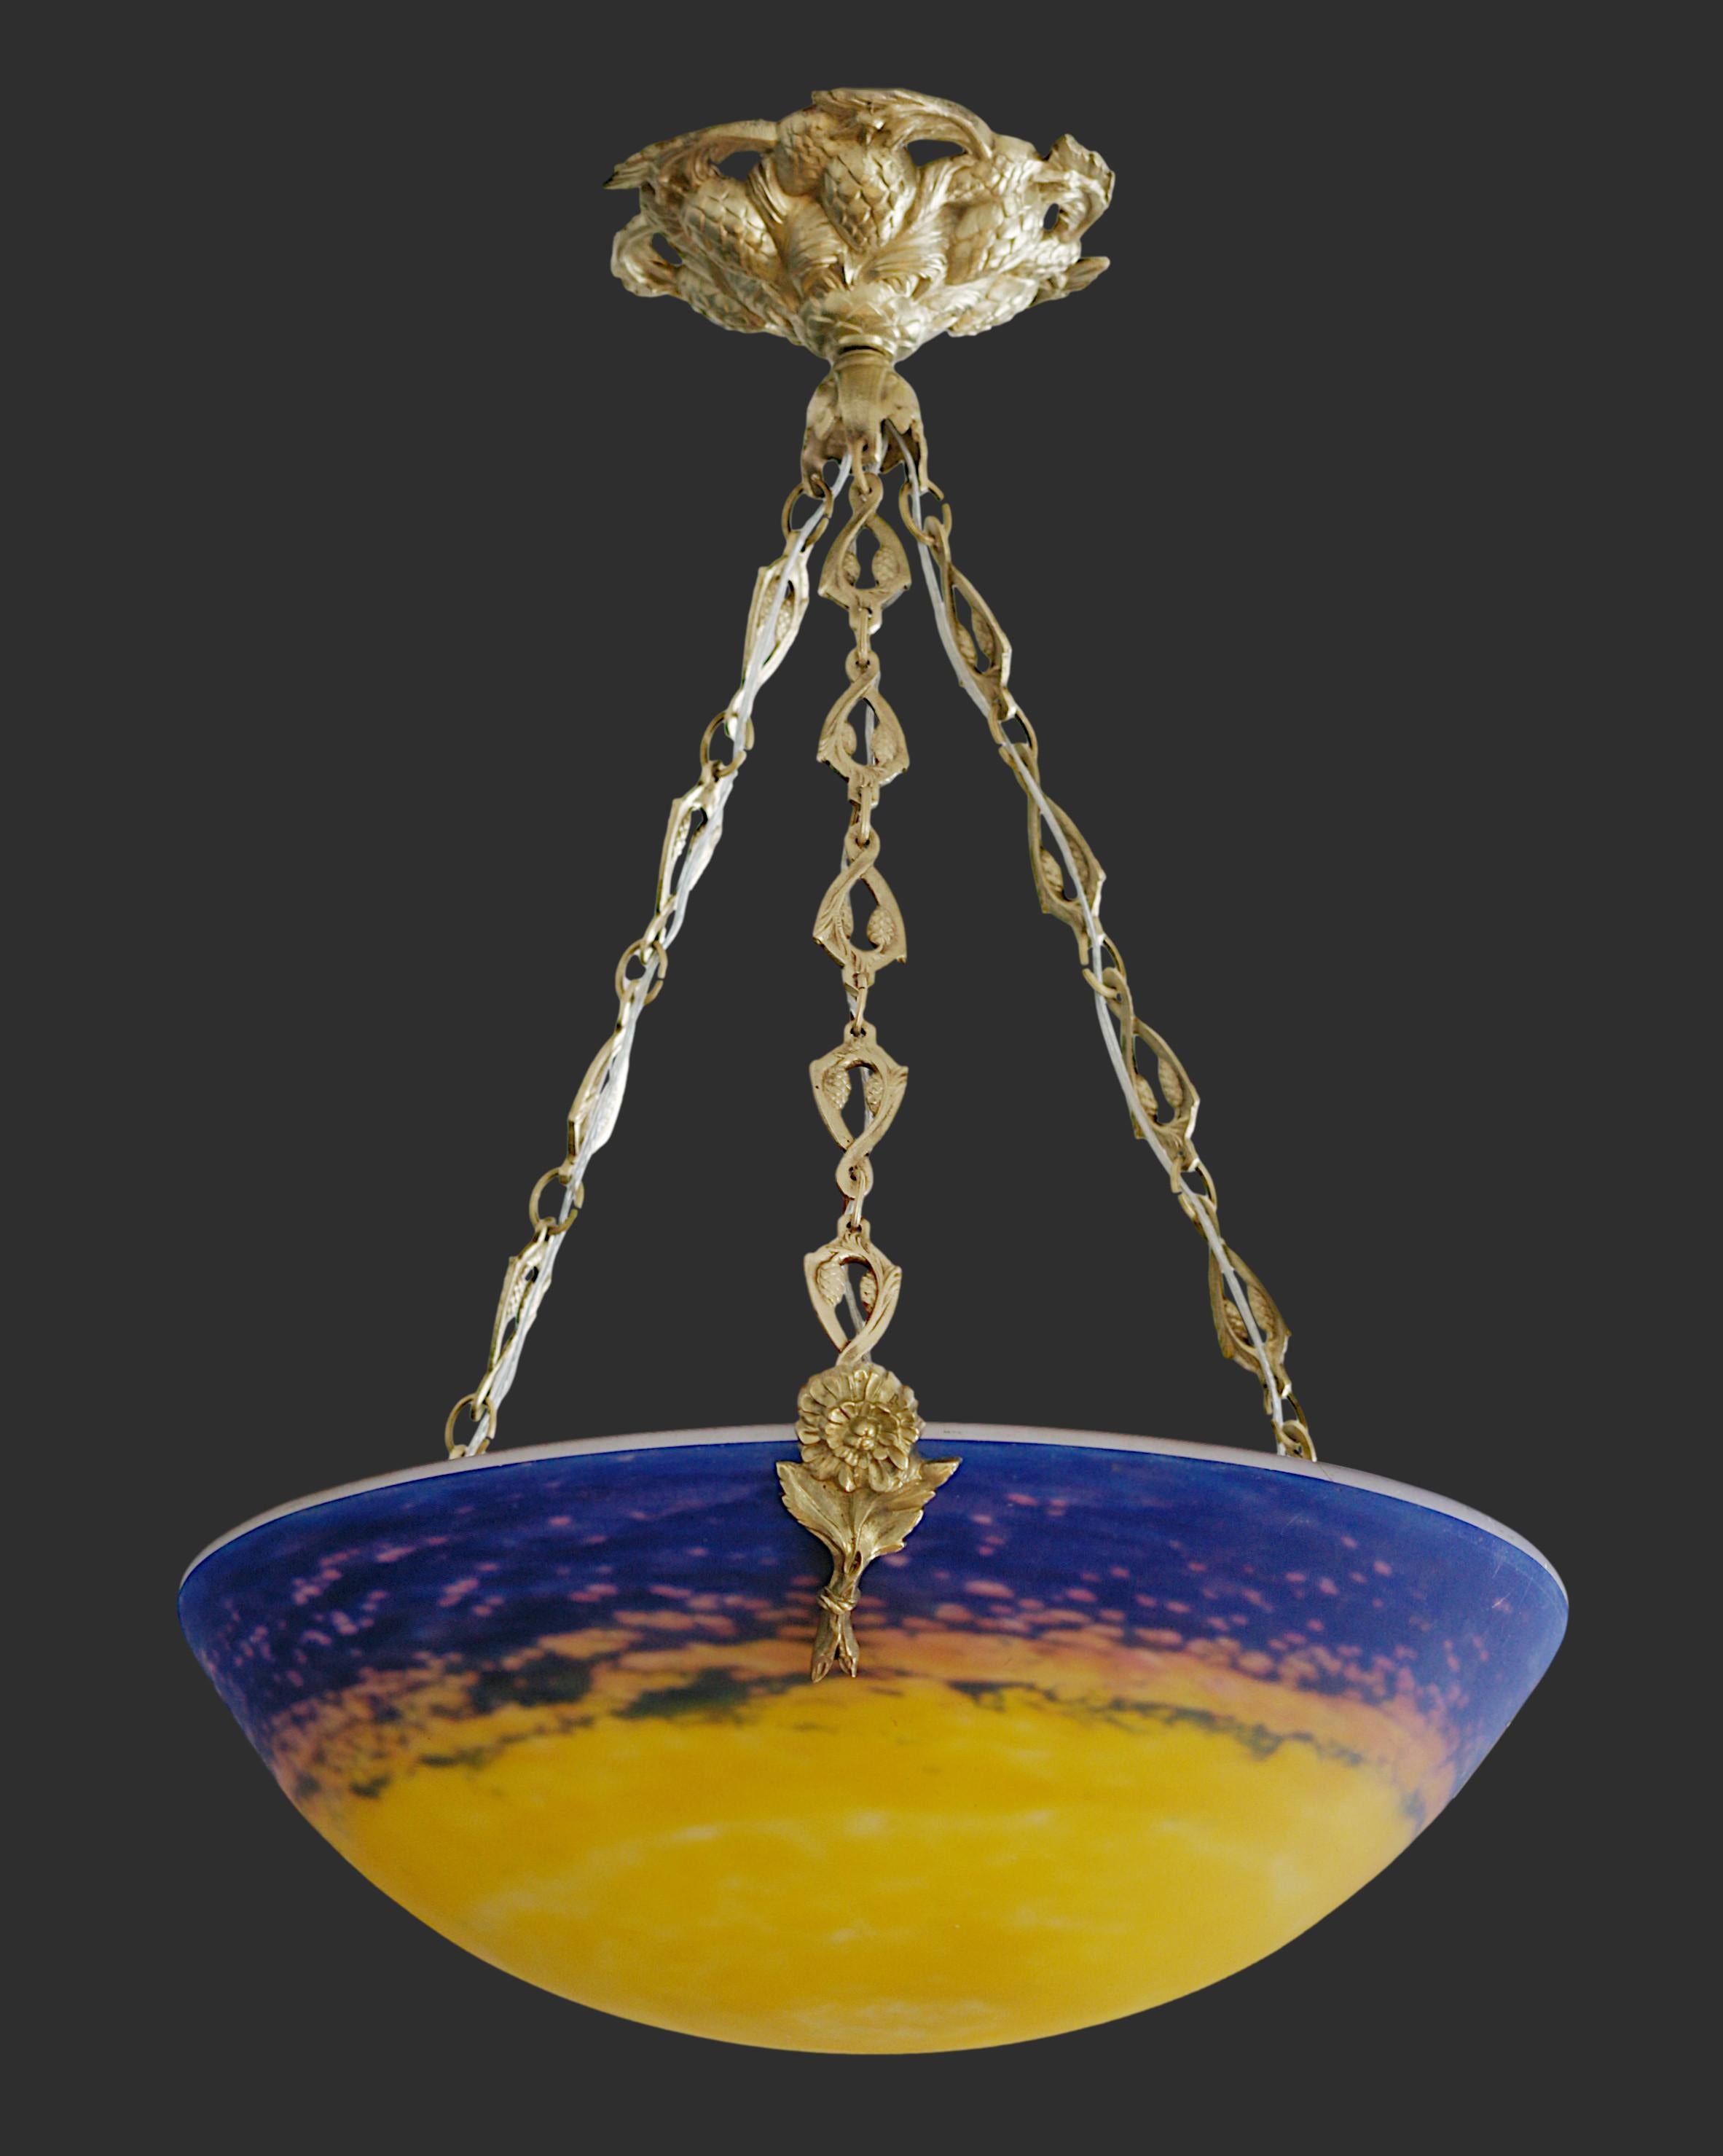 French Art Deco pendant by Muller Freres, Luneville, France, 1920s. Mottled glass shade, powders are applied between two layers that comes hung at its beautiful full bronze fixture. Height : 21.25